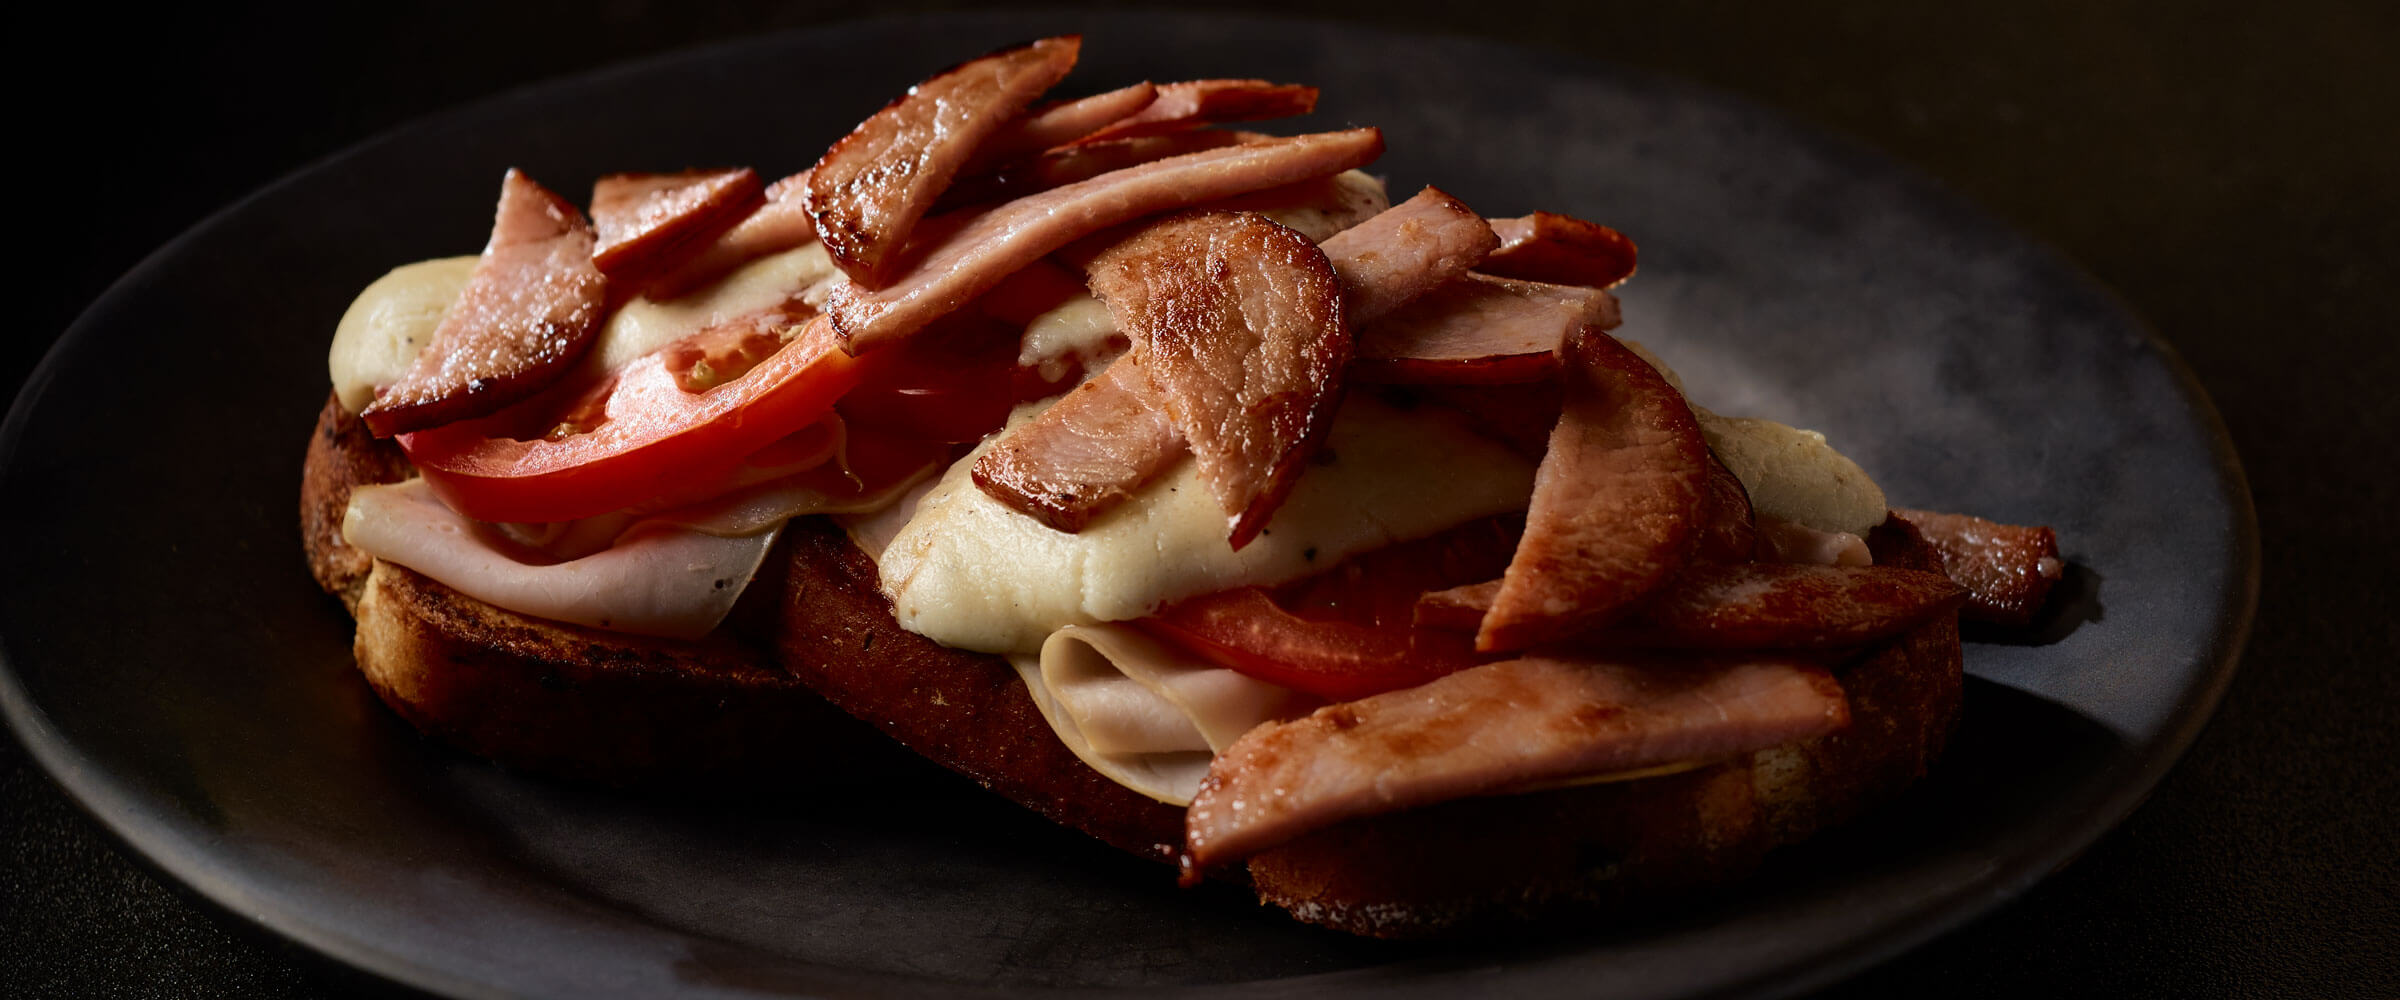 Canadian bacon Hot Browns on black plate